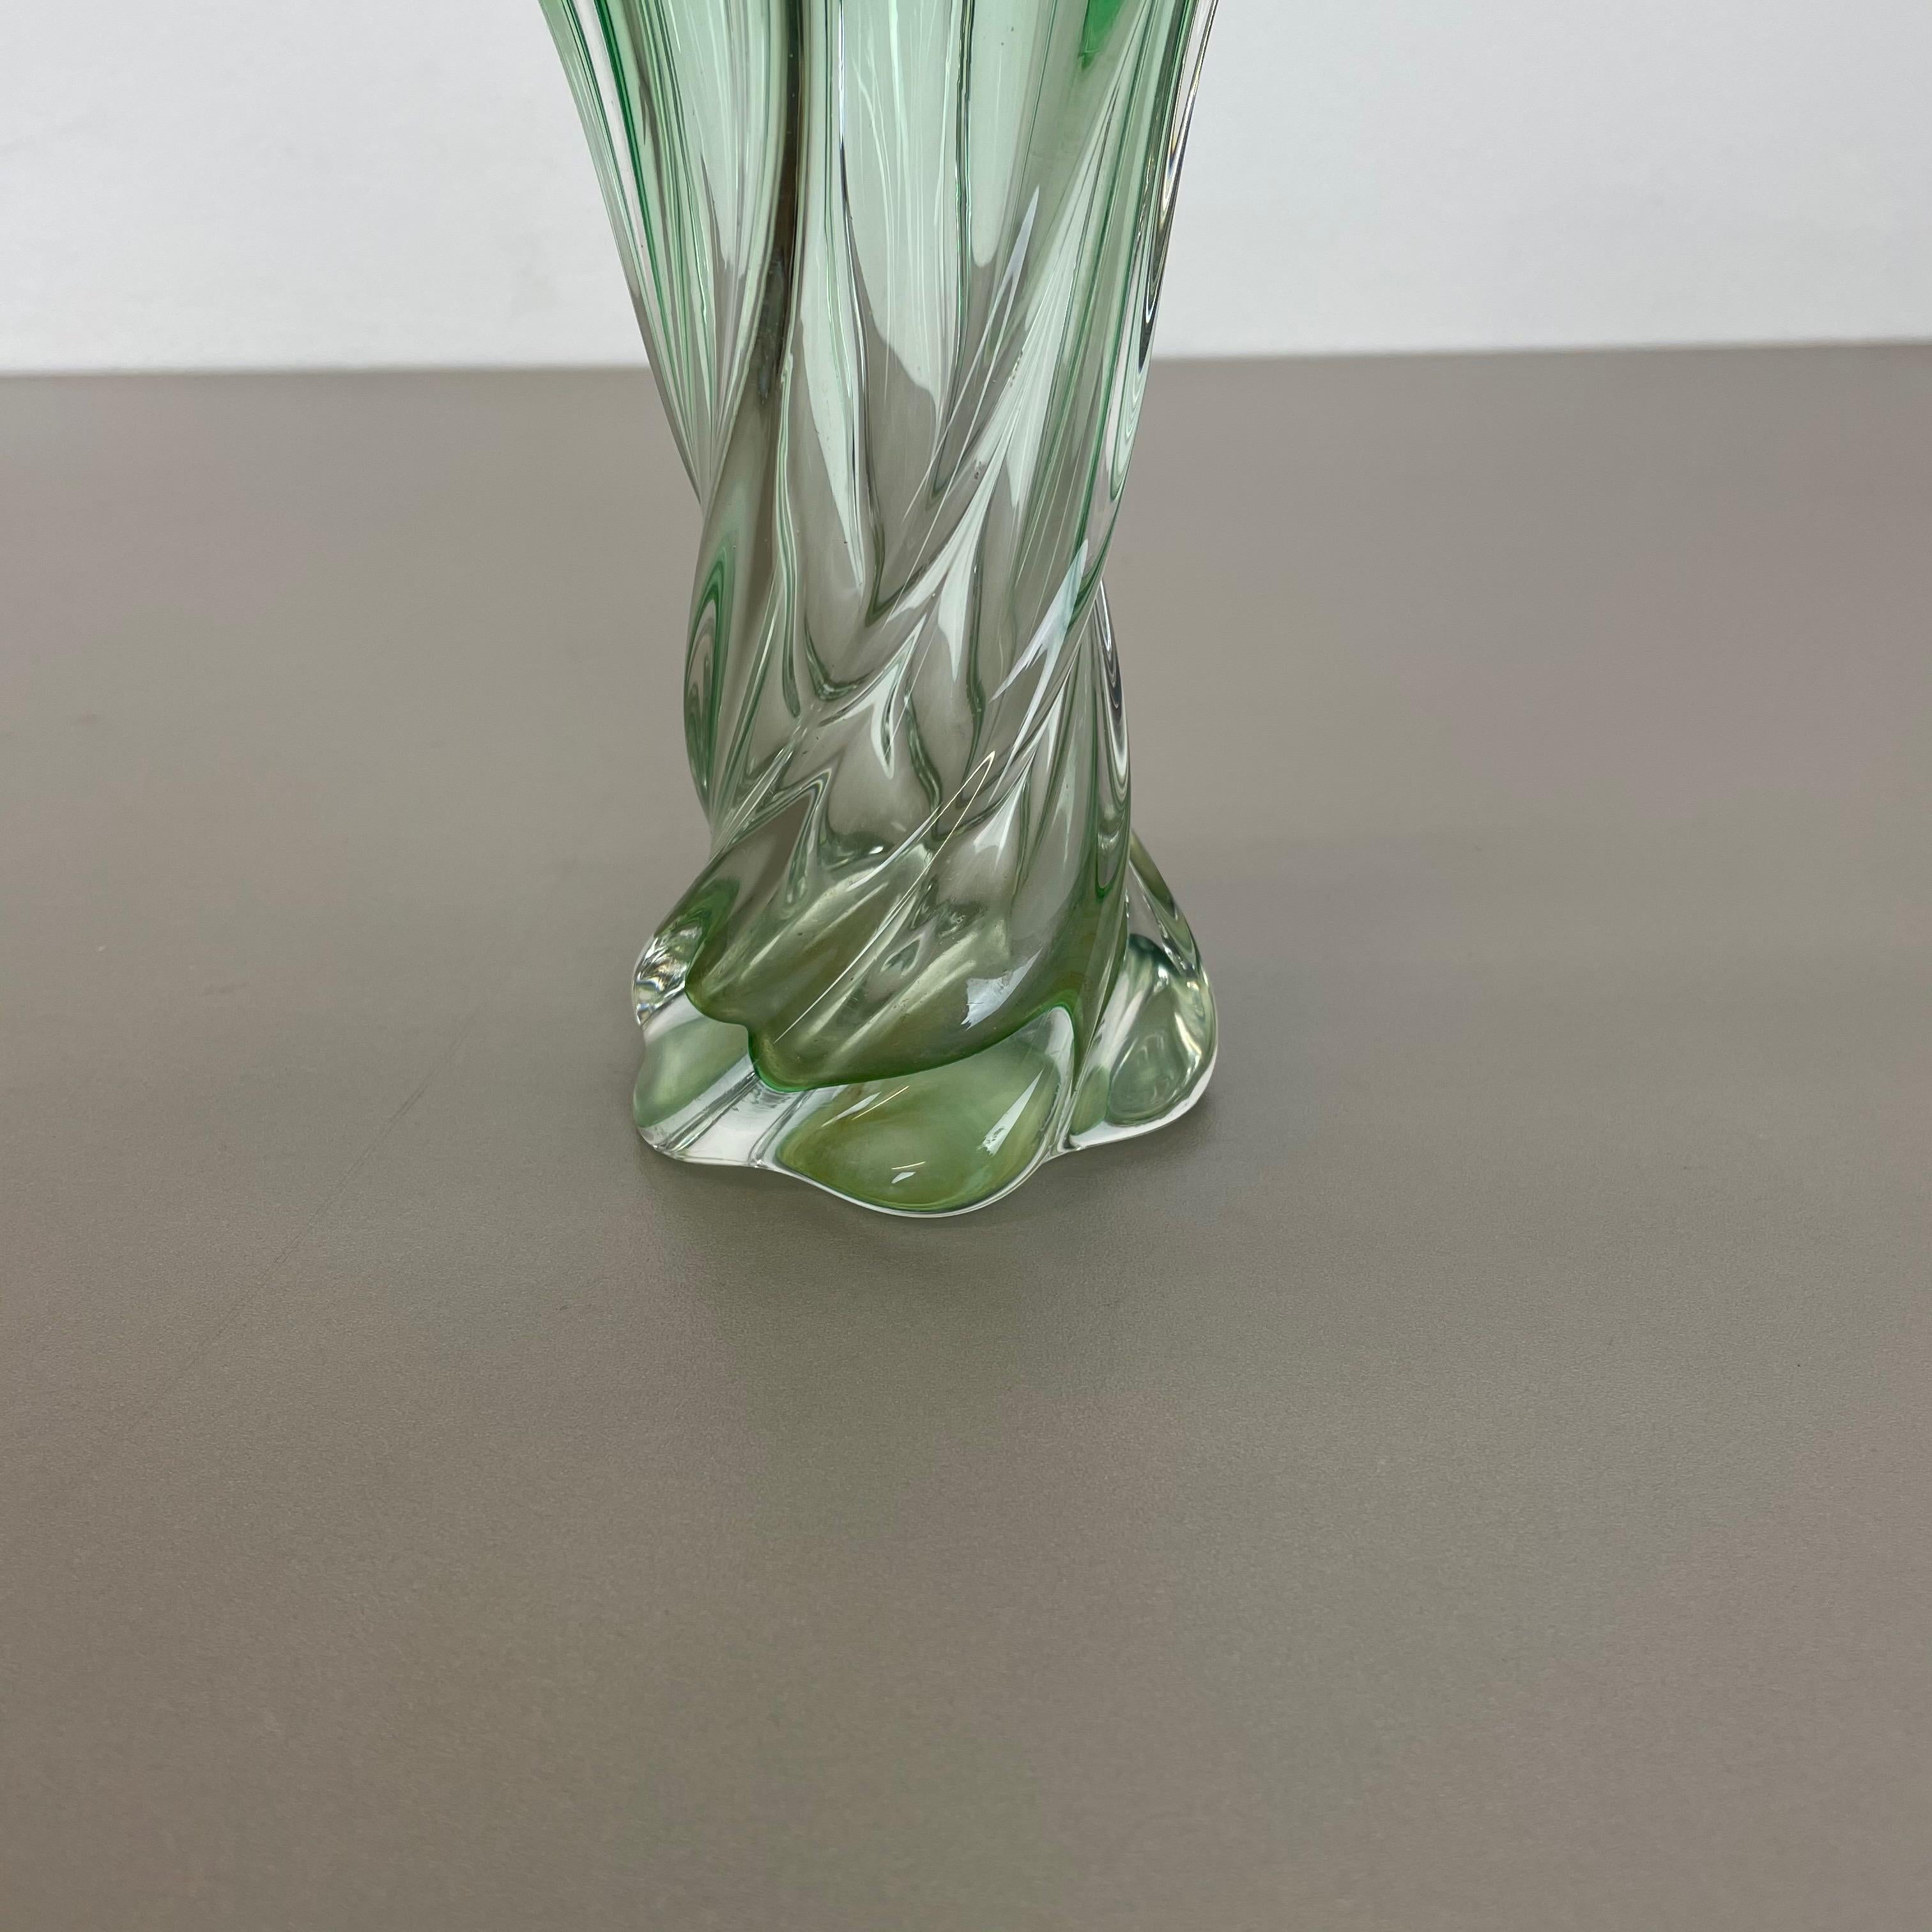 Murano Glass Extra Large Multi-Color Floral Glass Sommerso Vase Made in Murano, Italy, 1970s For Sale